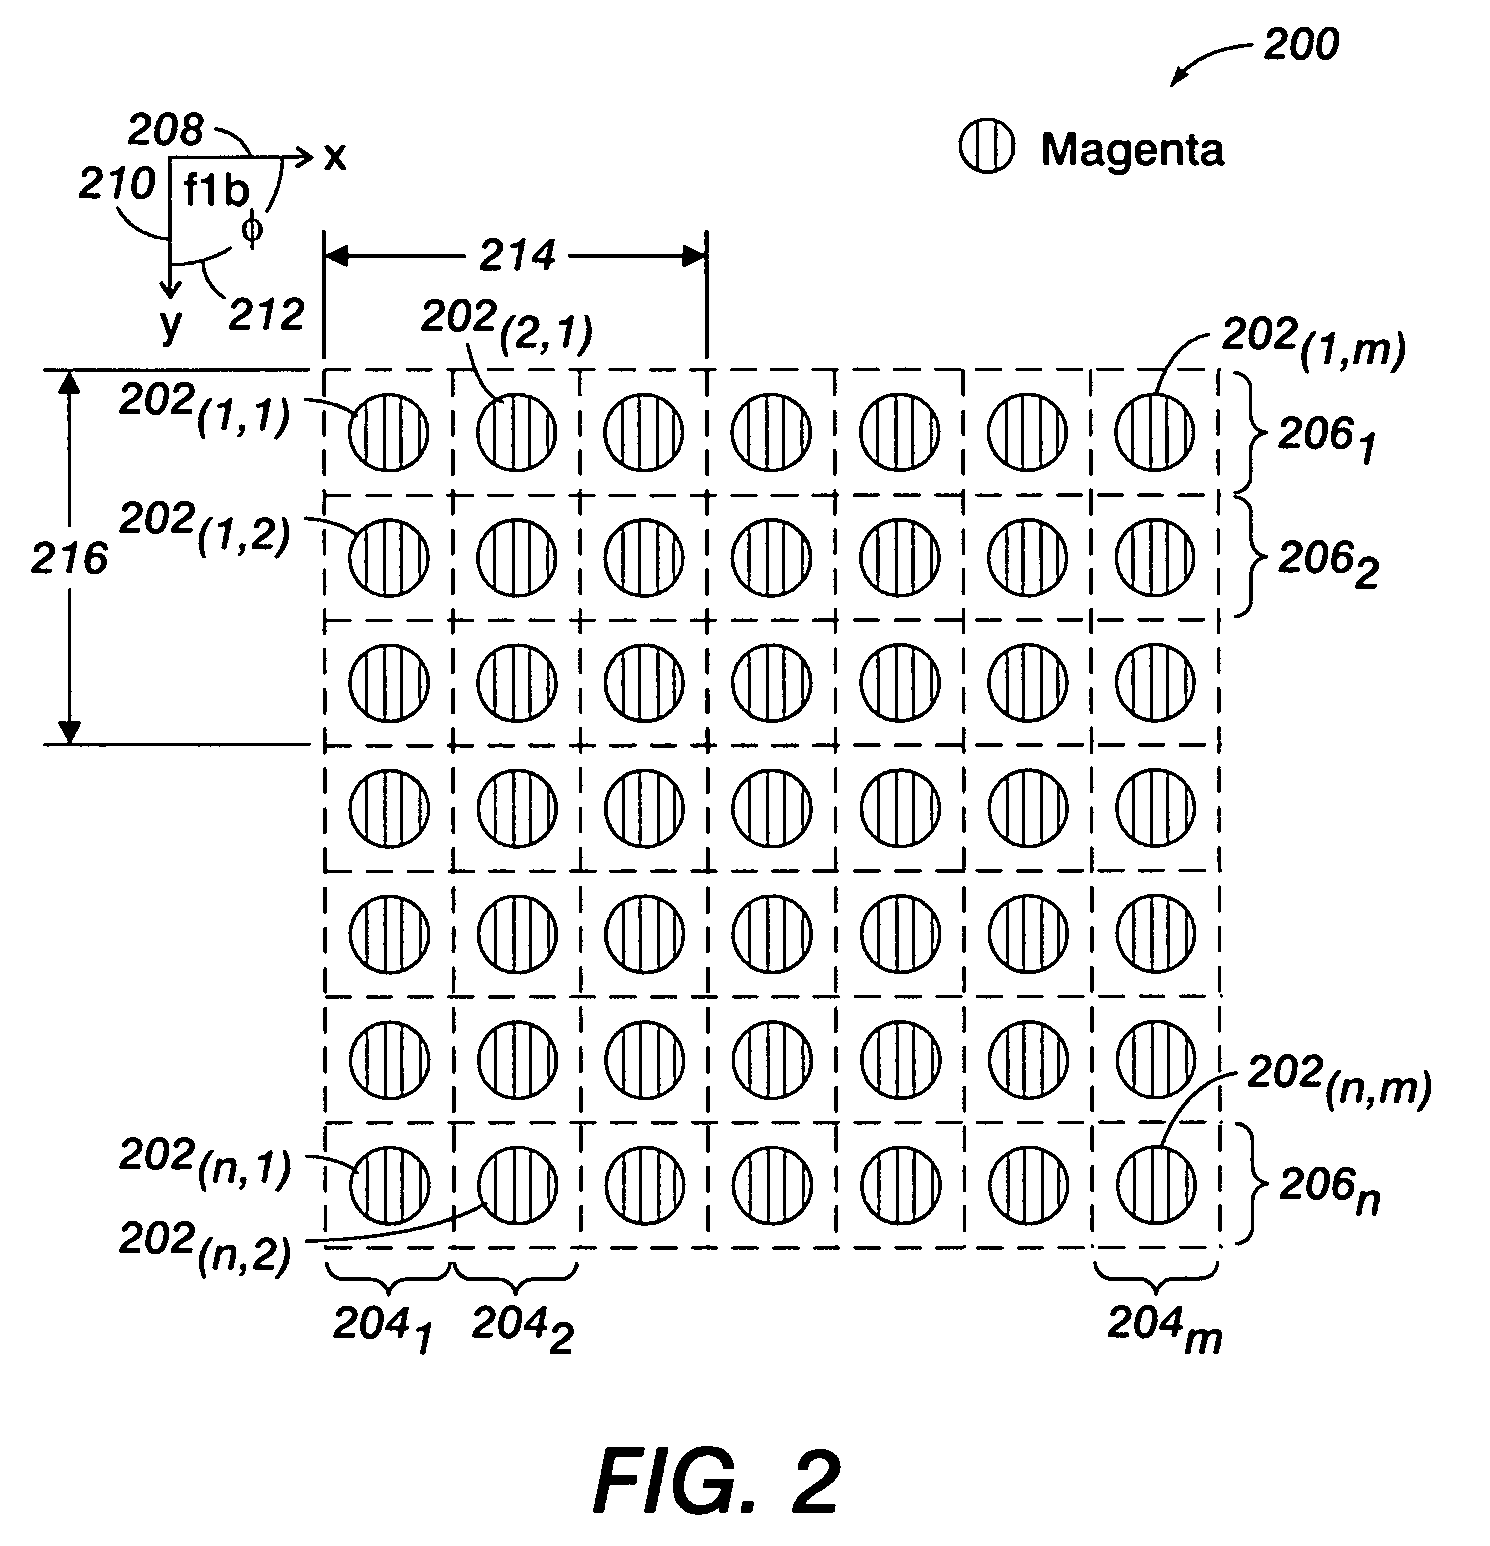 System and method for estimating color separation misregistration utilizing frequency-shifted halftone patterns that form a moiré pattern